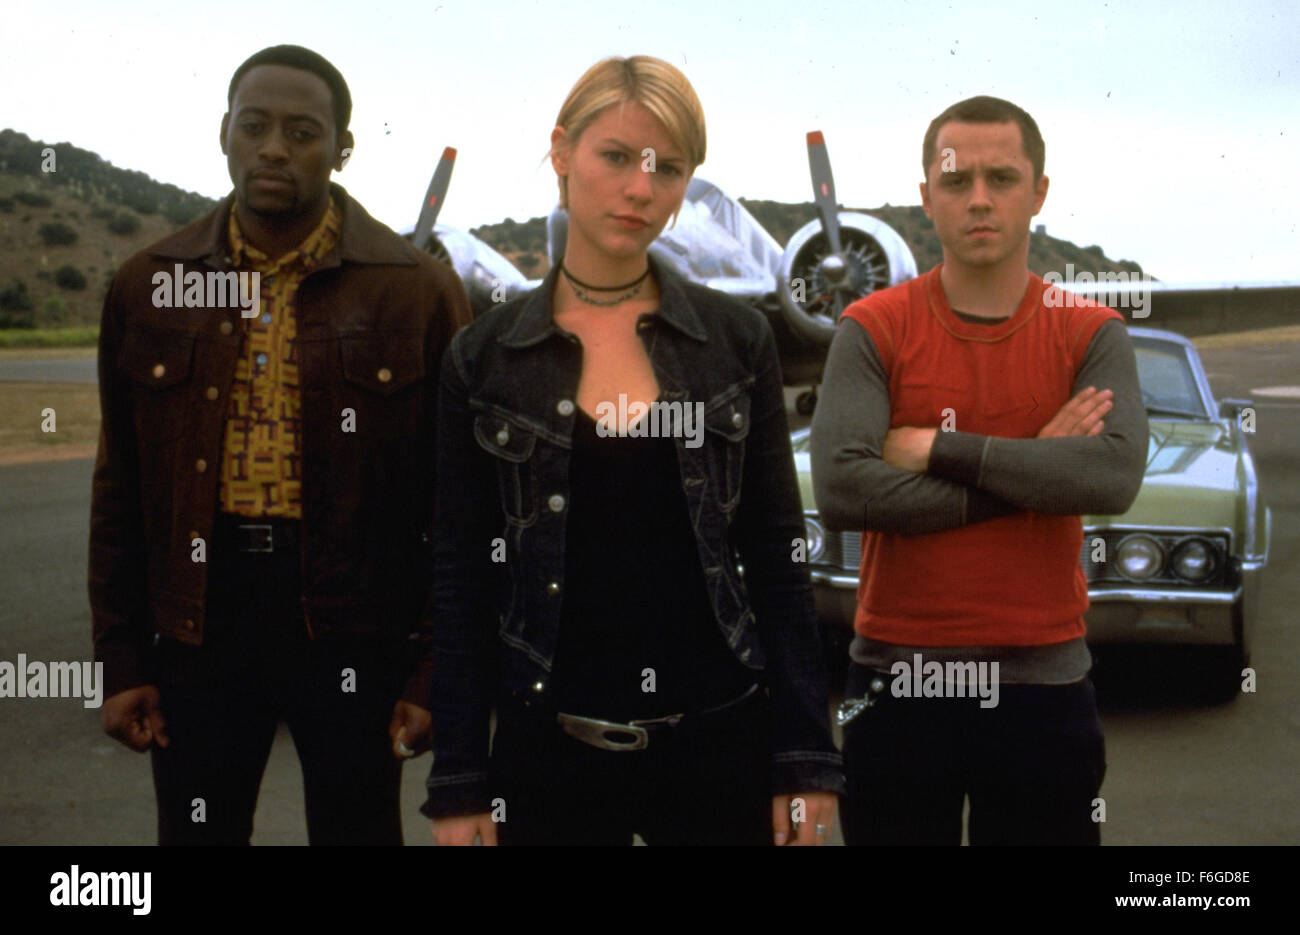 Mar 17, 1999; Los Angeles, CA, USA; Actors OMAR EPPS as Lincoln, CLAIRE DANES as Julie and GIOVANNI RIBISI as Peter in 'The Mod Squad'. Directed by Scott Silver. Stock Photo